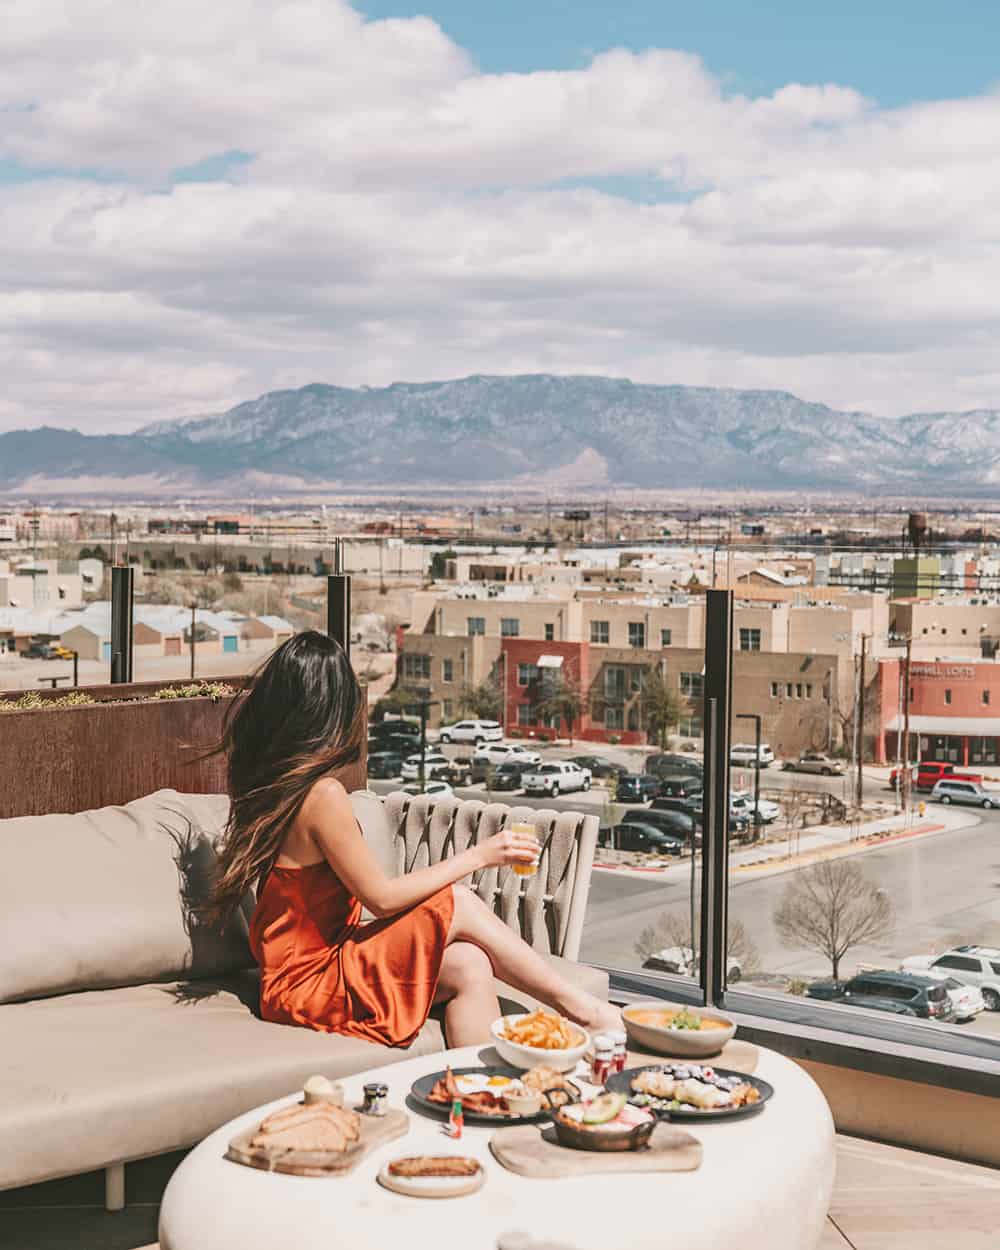 Rooftop Hotel Chaco in Albuquerque, New Mexico